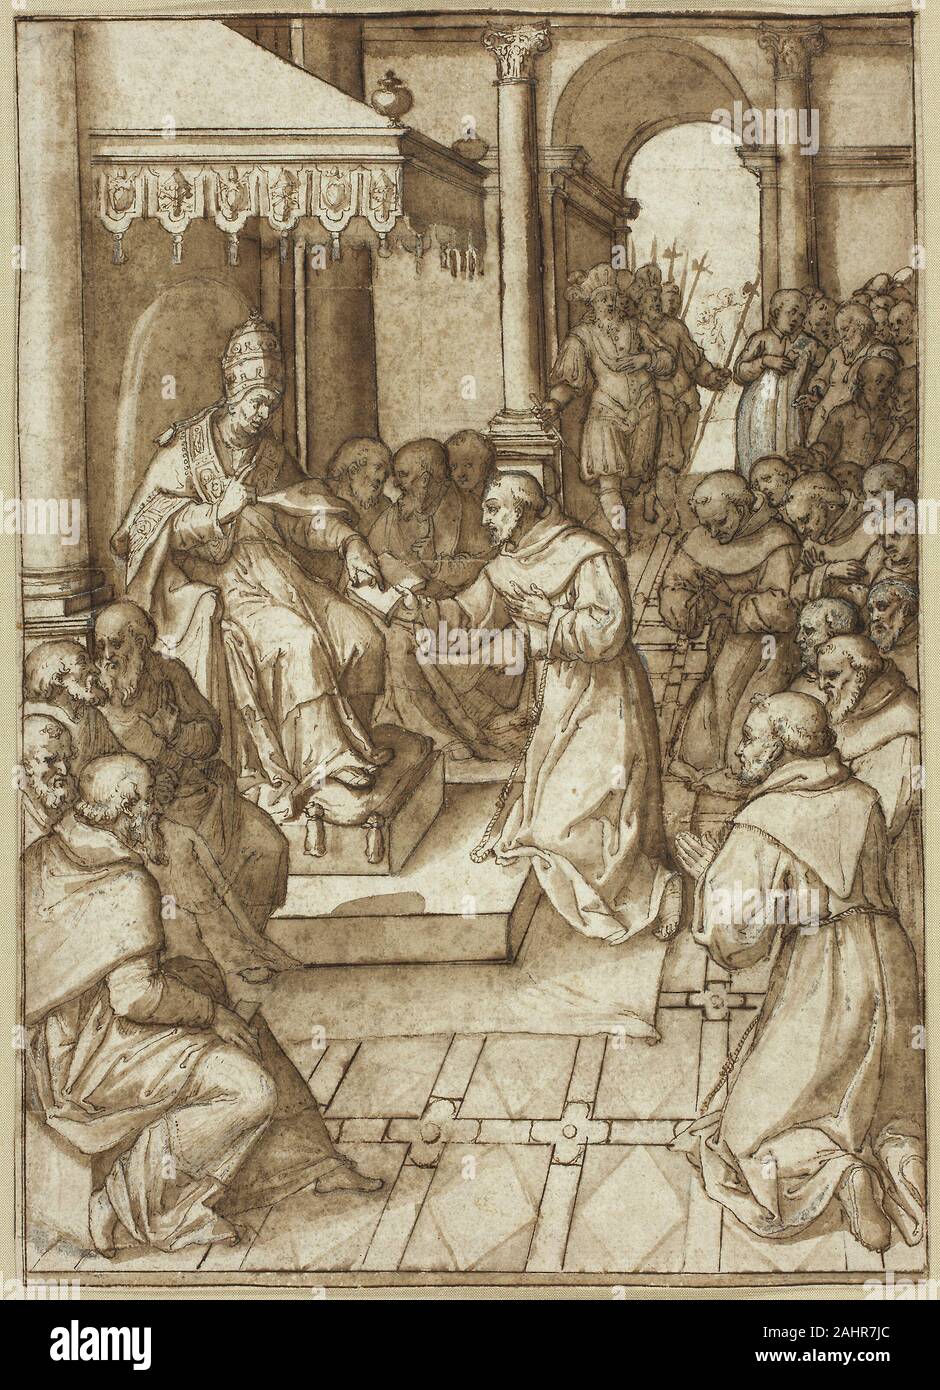 Livio Agresti. Approval of the Rules of the Franciscan Order by Pope Innocent III in 1209. 1528–1579. Italy. Pen and brown ink, with brush and brown wash, heightened with lead white gouache, over incising and black chalk, on cream laid paper Saint Francis kneels before Pope Innocent III as he sanctioned the establishment of the Franciscan order by his gesture. By the time of the Counter-Reformation, these were cornerstone traditions that reformers such as Cardinal Carlo Borromeo upheld in their reevaluation of the Roman Catholic faith after the Council of Trent. Stock Photo